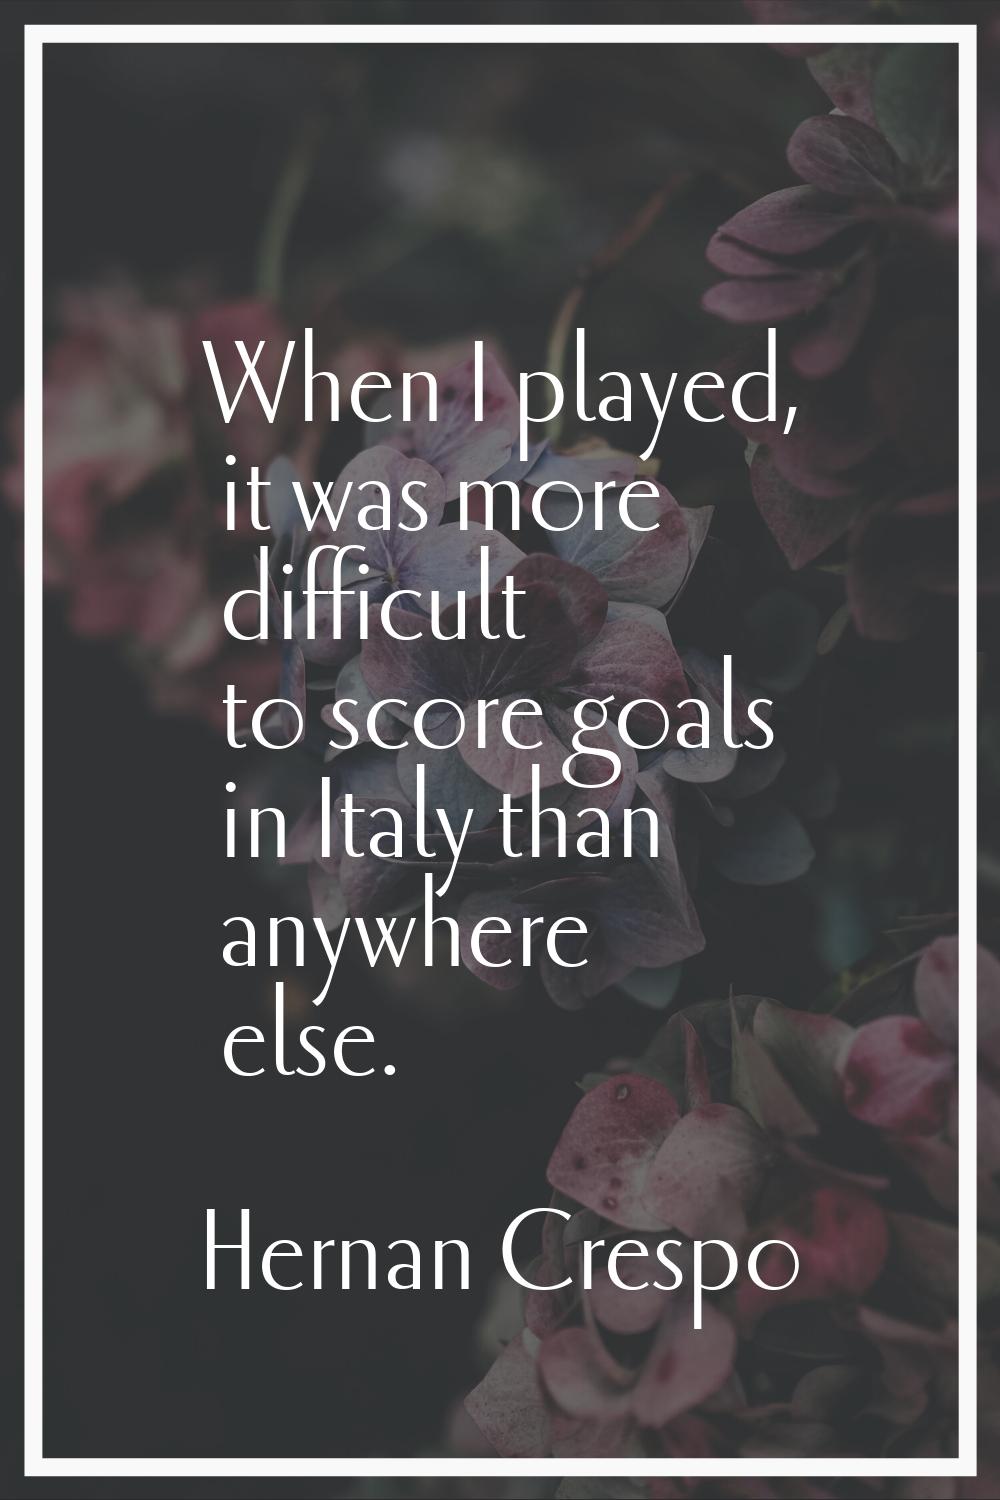 When I played, it was more difficult to score goals in Italy than anywhere else.